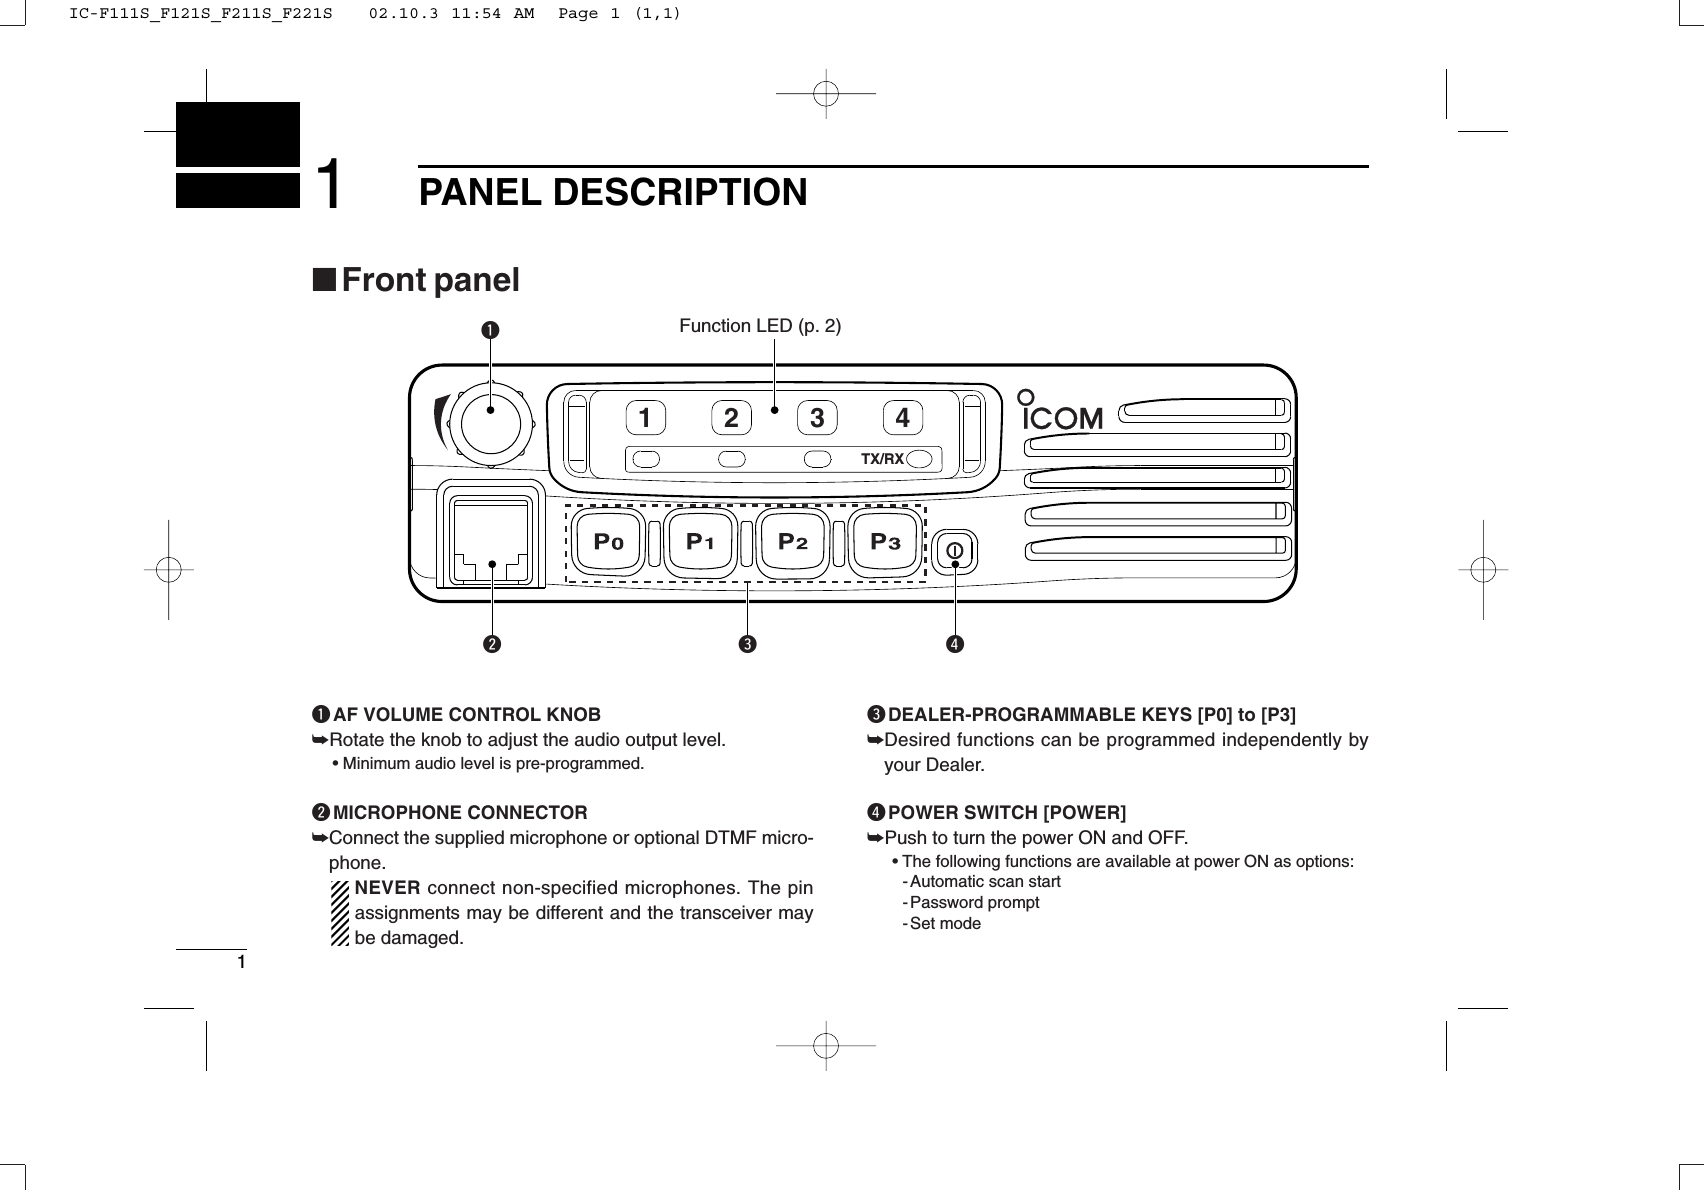 11PANEL DESCRIPTIONTX/RX1234qwerFunction LED (p. 2)■Front panelqAF VOLUME CONTROL KNOB➥Rotate the knob to adjust the audio output level.• Minimum audio level is pre-programmed.wMICROPHONE CONNECTOR➥Connect the supplied microphone or optional DTMF micro-phone.NEVER connect non-specified microphones. The pinassignments may be different and the transceiver maybe damaged.eDEALER-PROGRAMMABLE KEYS [P0] to [P3]➥Desired functions can be programmed independently byyour Dealer.rPOWER SWITCH [POWER]➥Push to turn the power ON and OFF.• The following functions are available at power ON as options:- Automatic scan start- Password prompt- Set modeIC-F111S_F121S_F211S_F221S   02.10.3 11:54 AM  Page 1 (1,1)